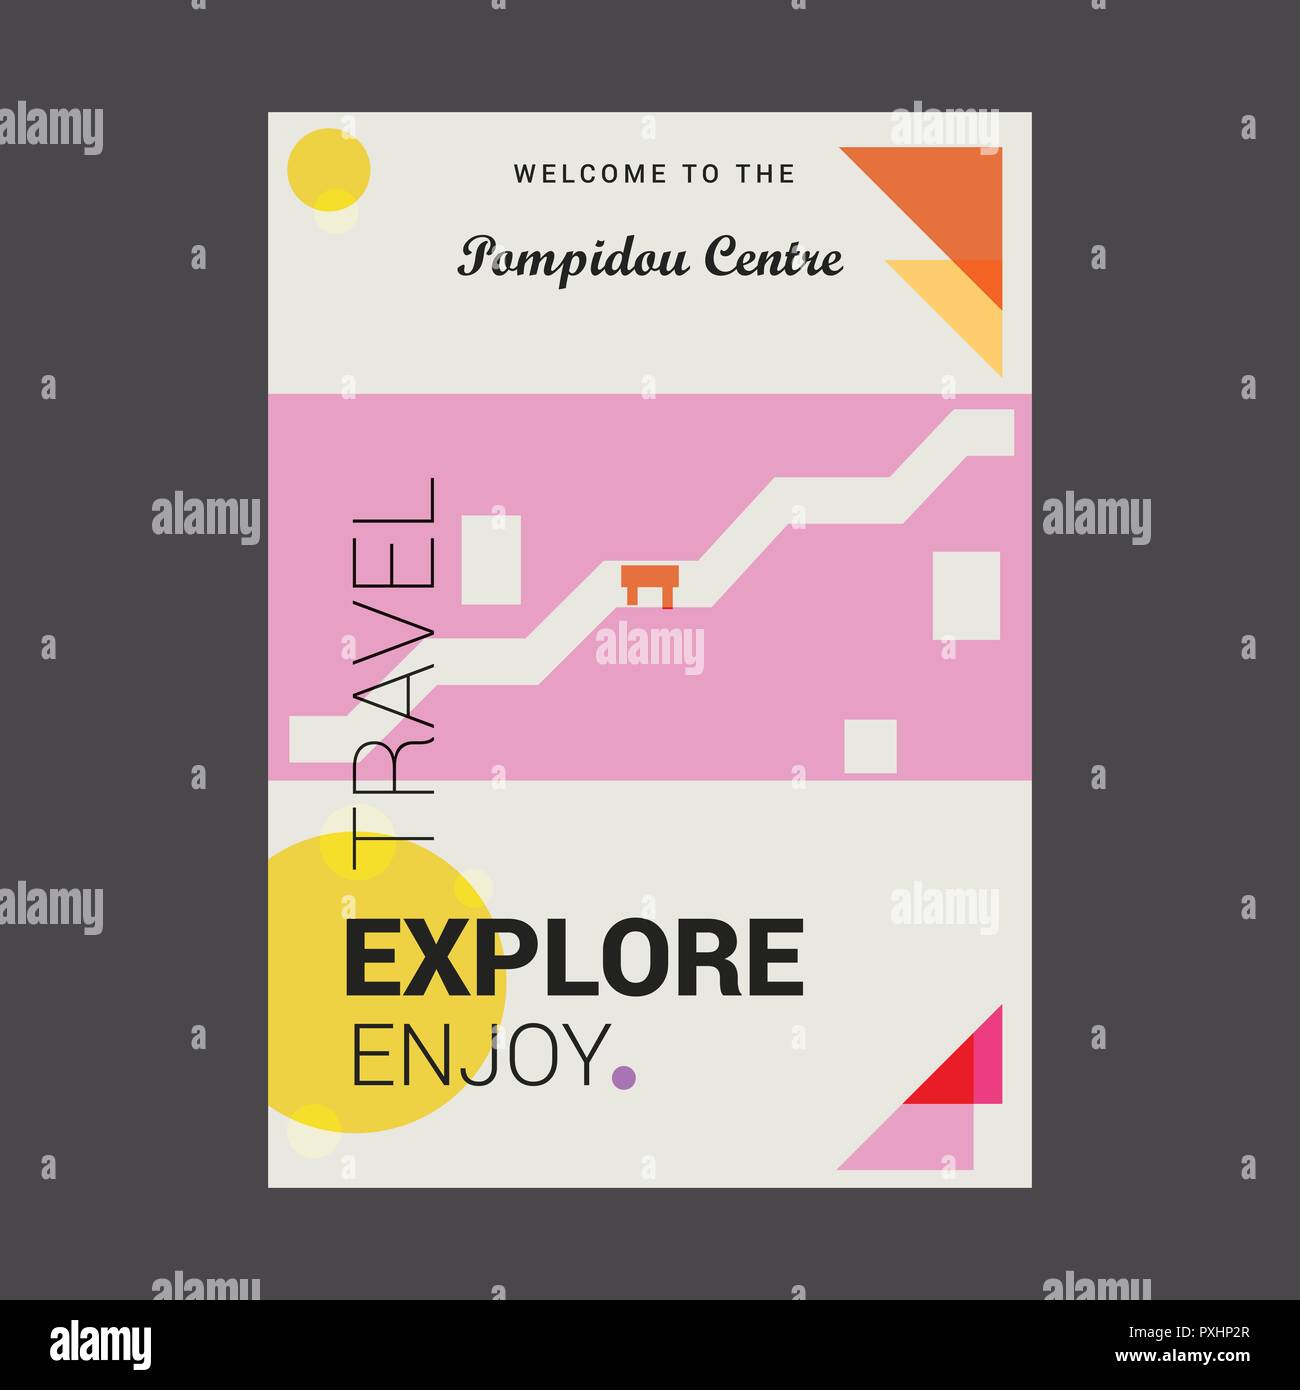 Welcome to The Pompidou Centre Paris, France Explore, Travel Enjoy Poster Template Stock Vector